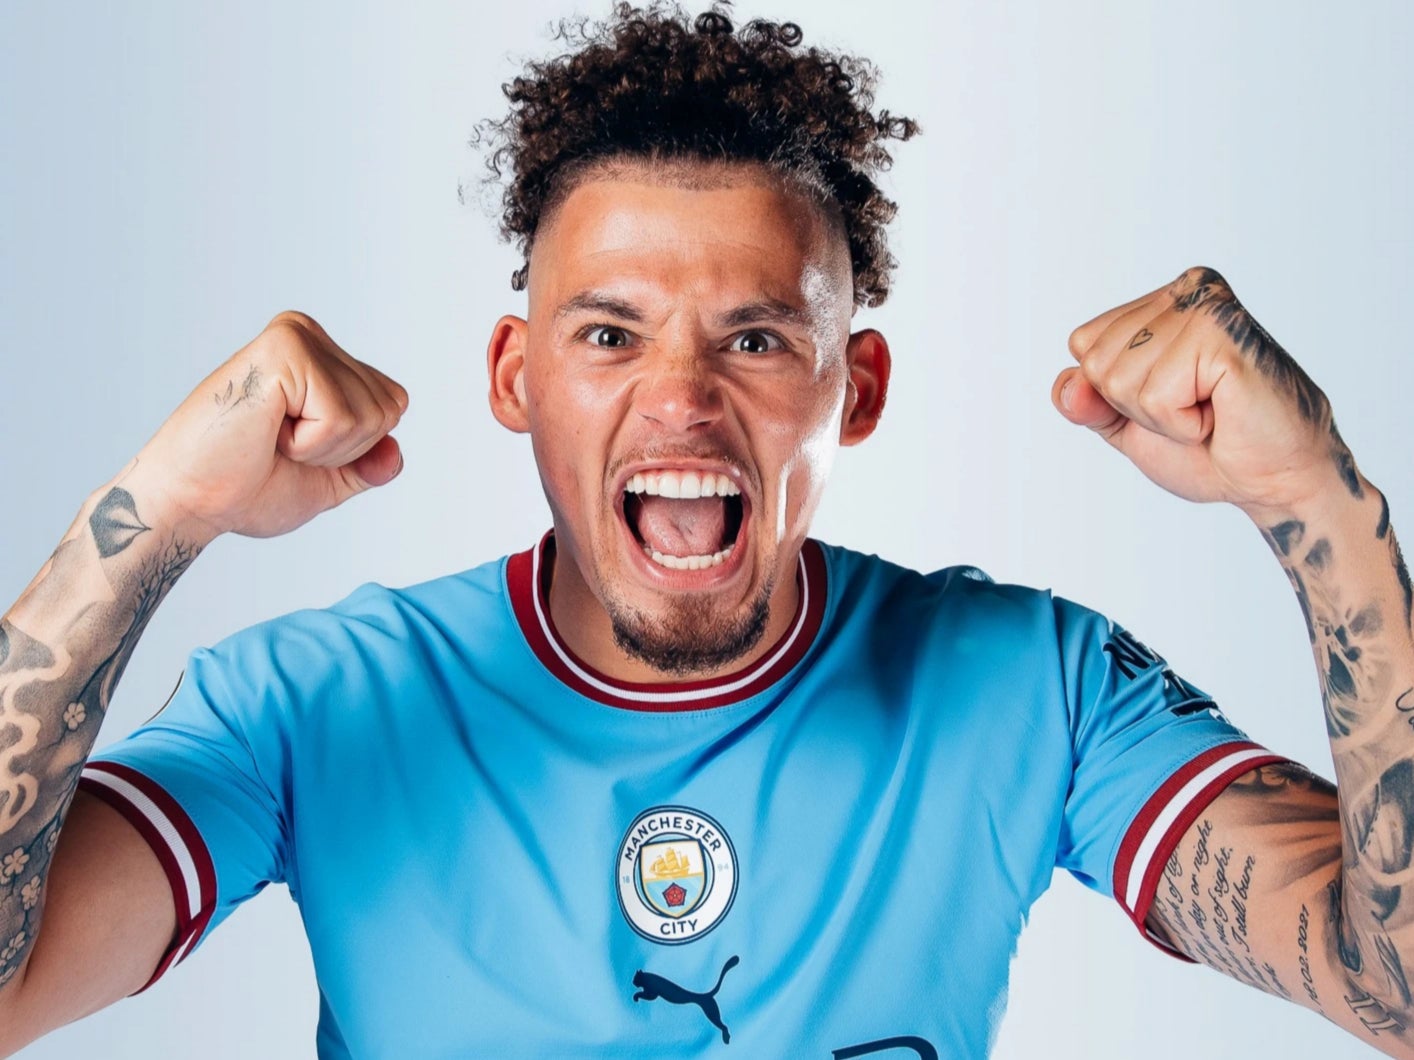 Manchester City have signed Leeds midfielder Kalvin Phillips in initial £42m deal